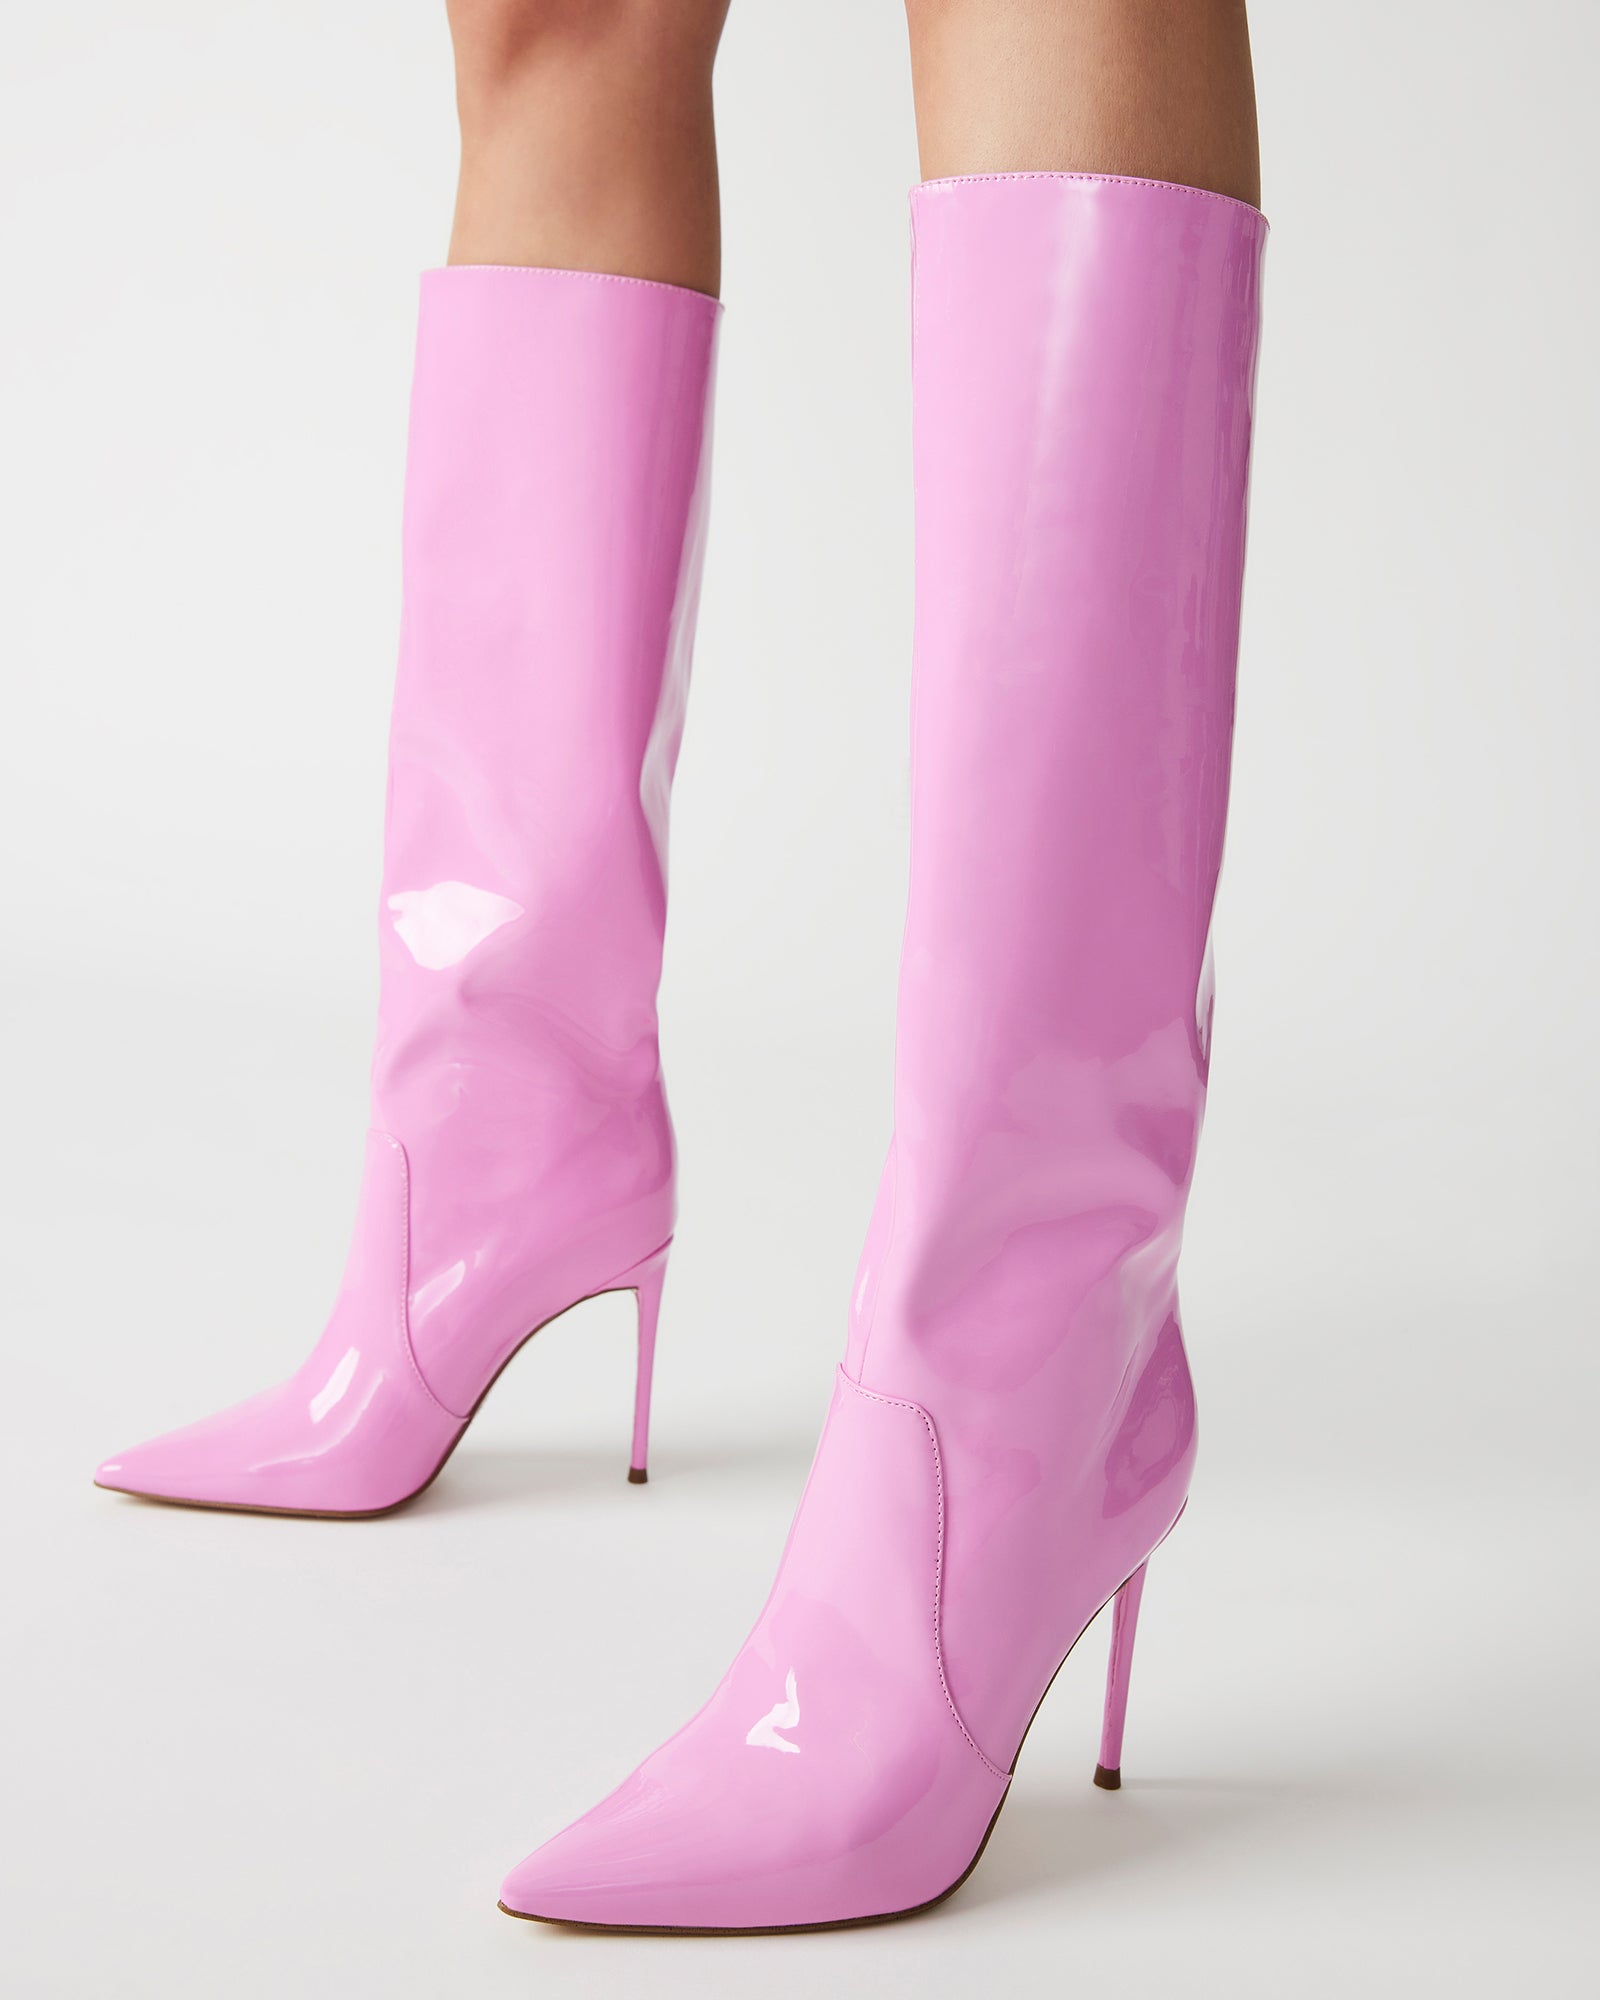 PANTHER Pink Patent Knee High Pointed Toe Boot | Women's Boots – Steve ...